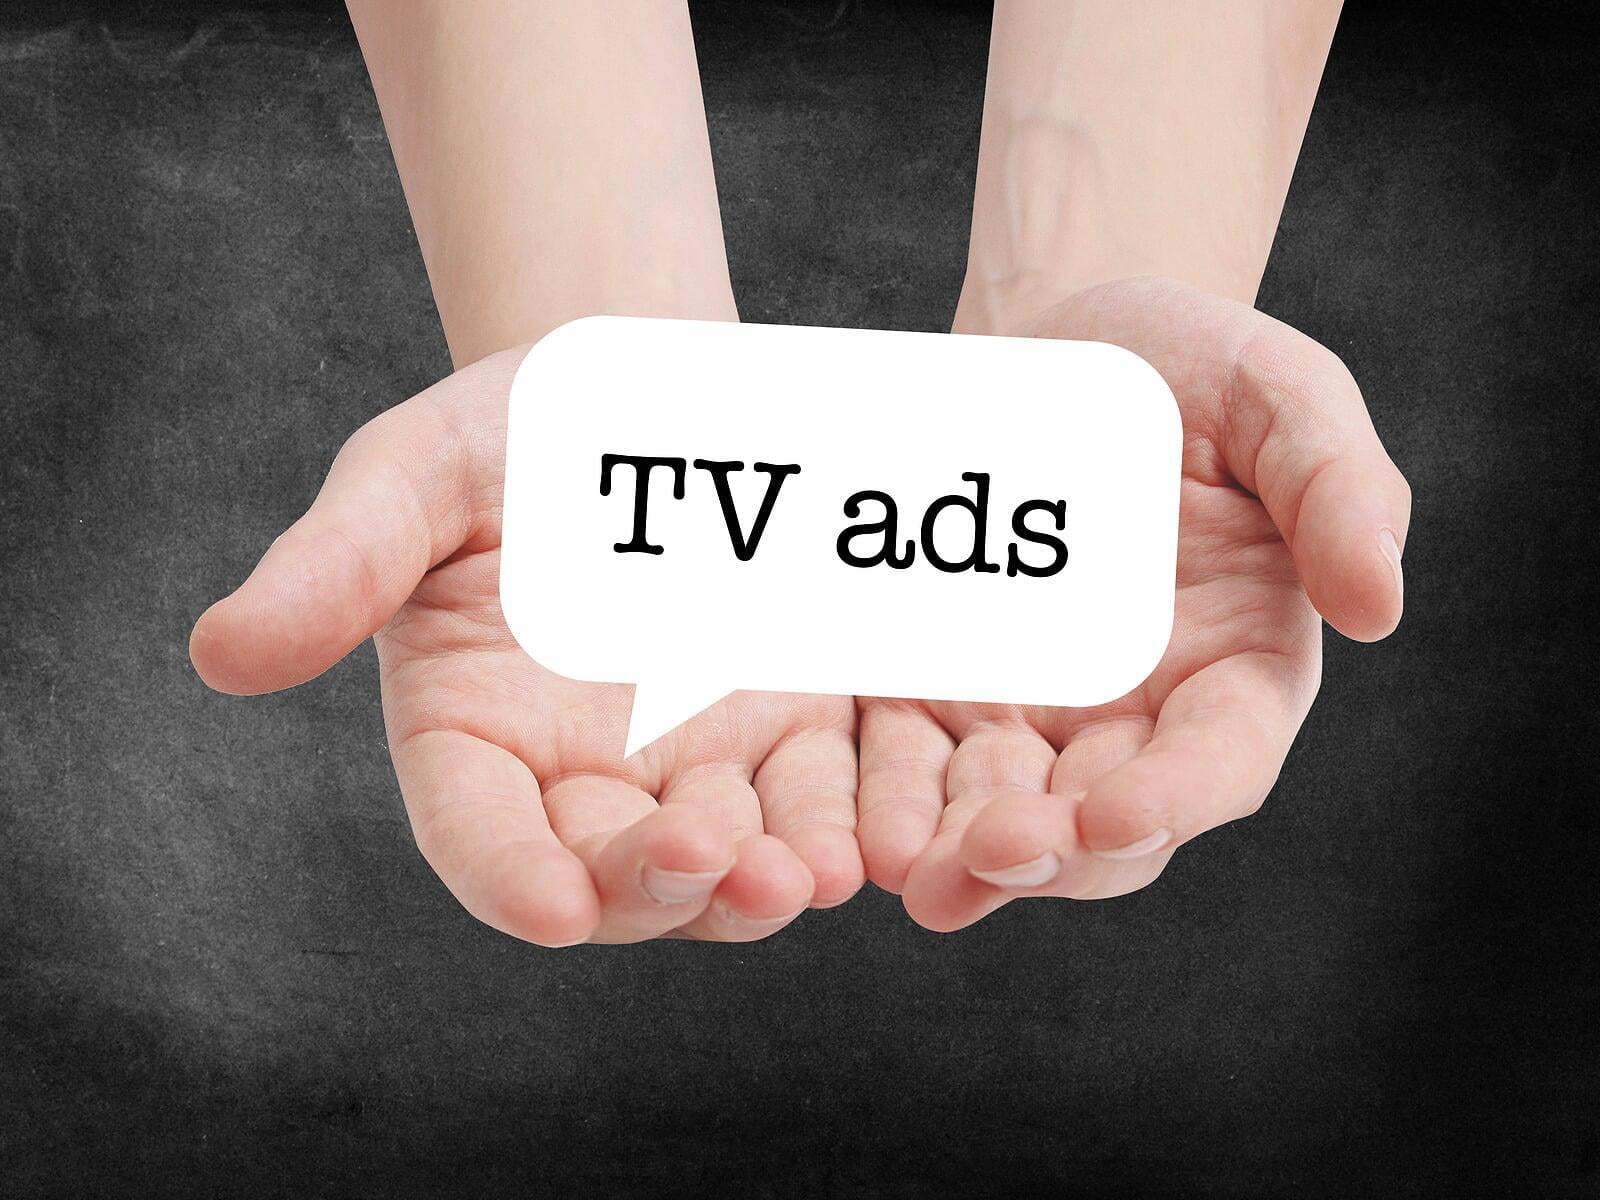 TV Ads Vs. Connected TV Ads